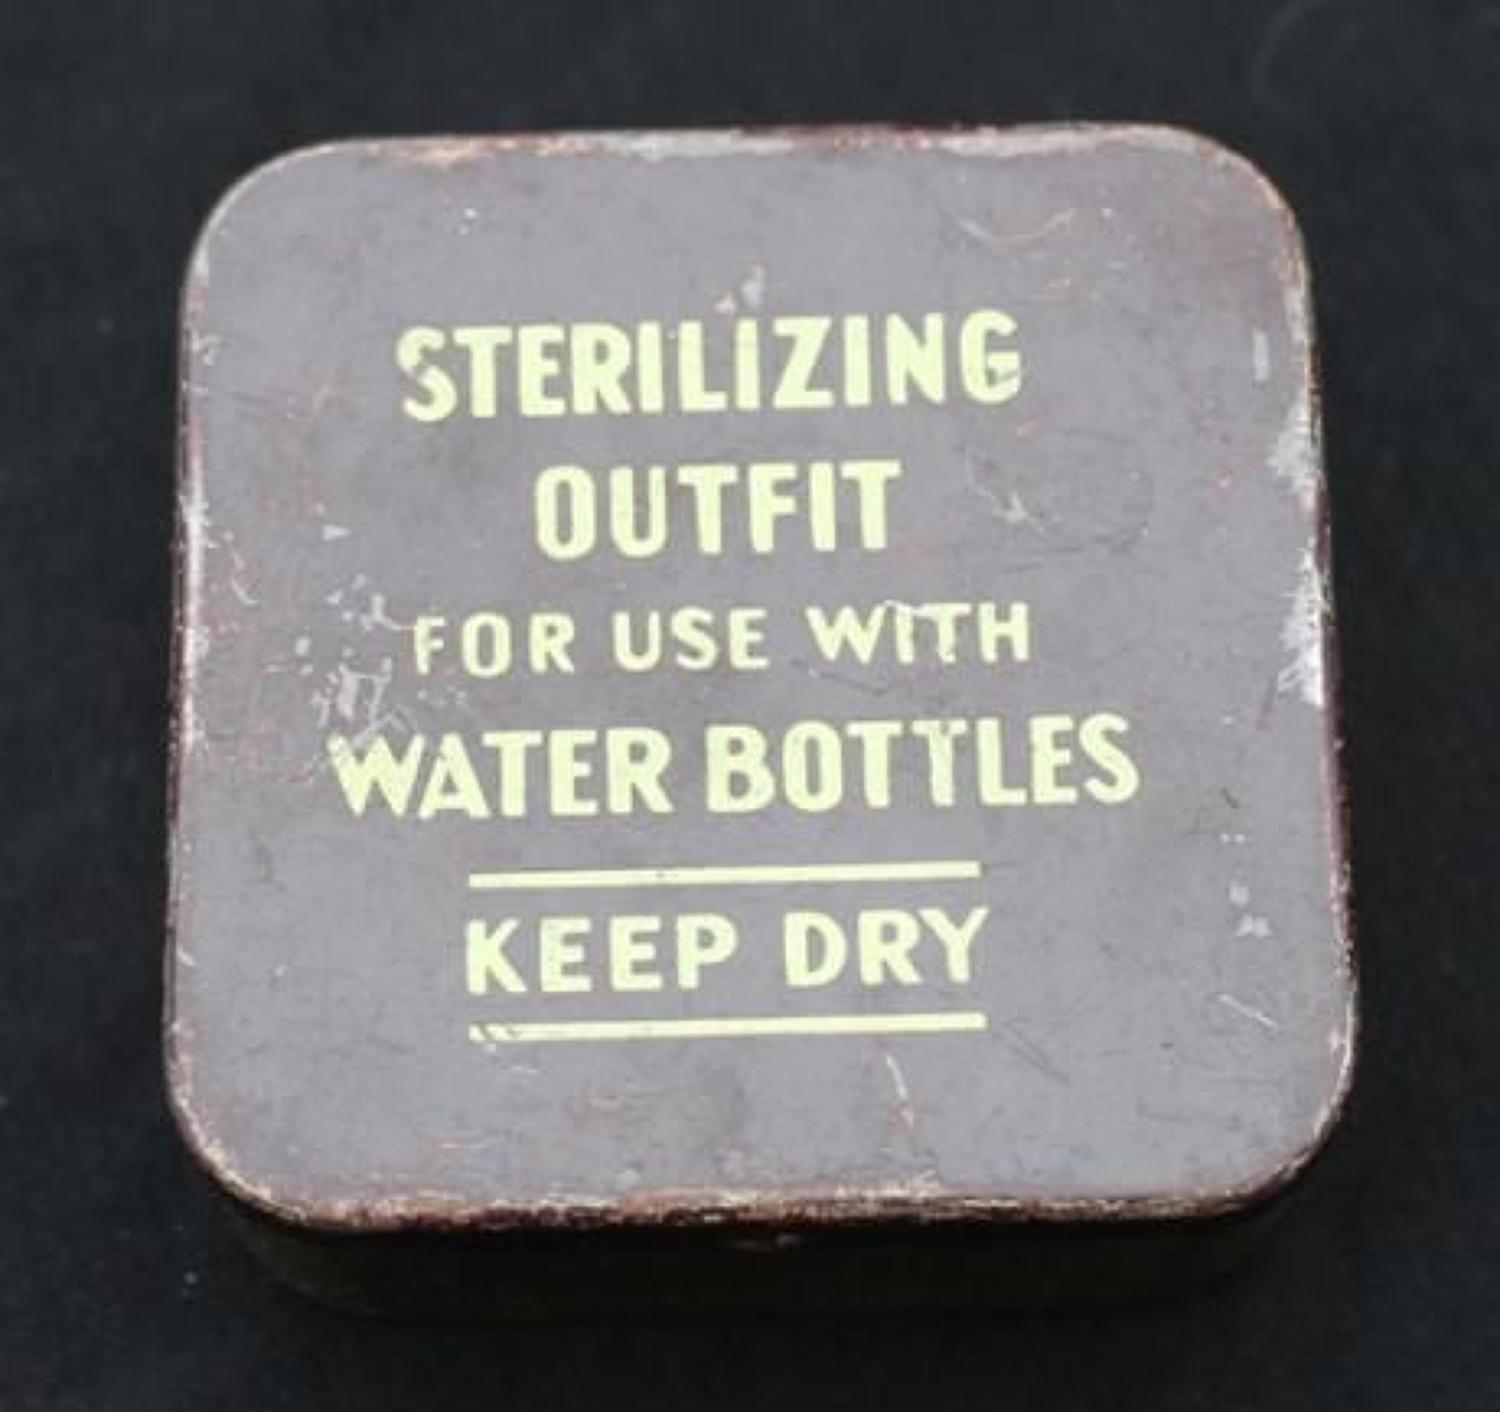 Sterilizing Outfit For Use With Water Bottles